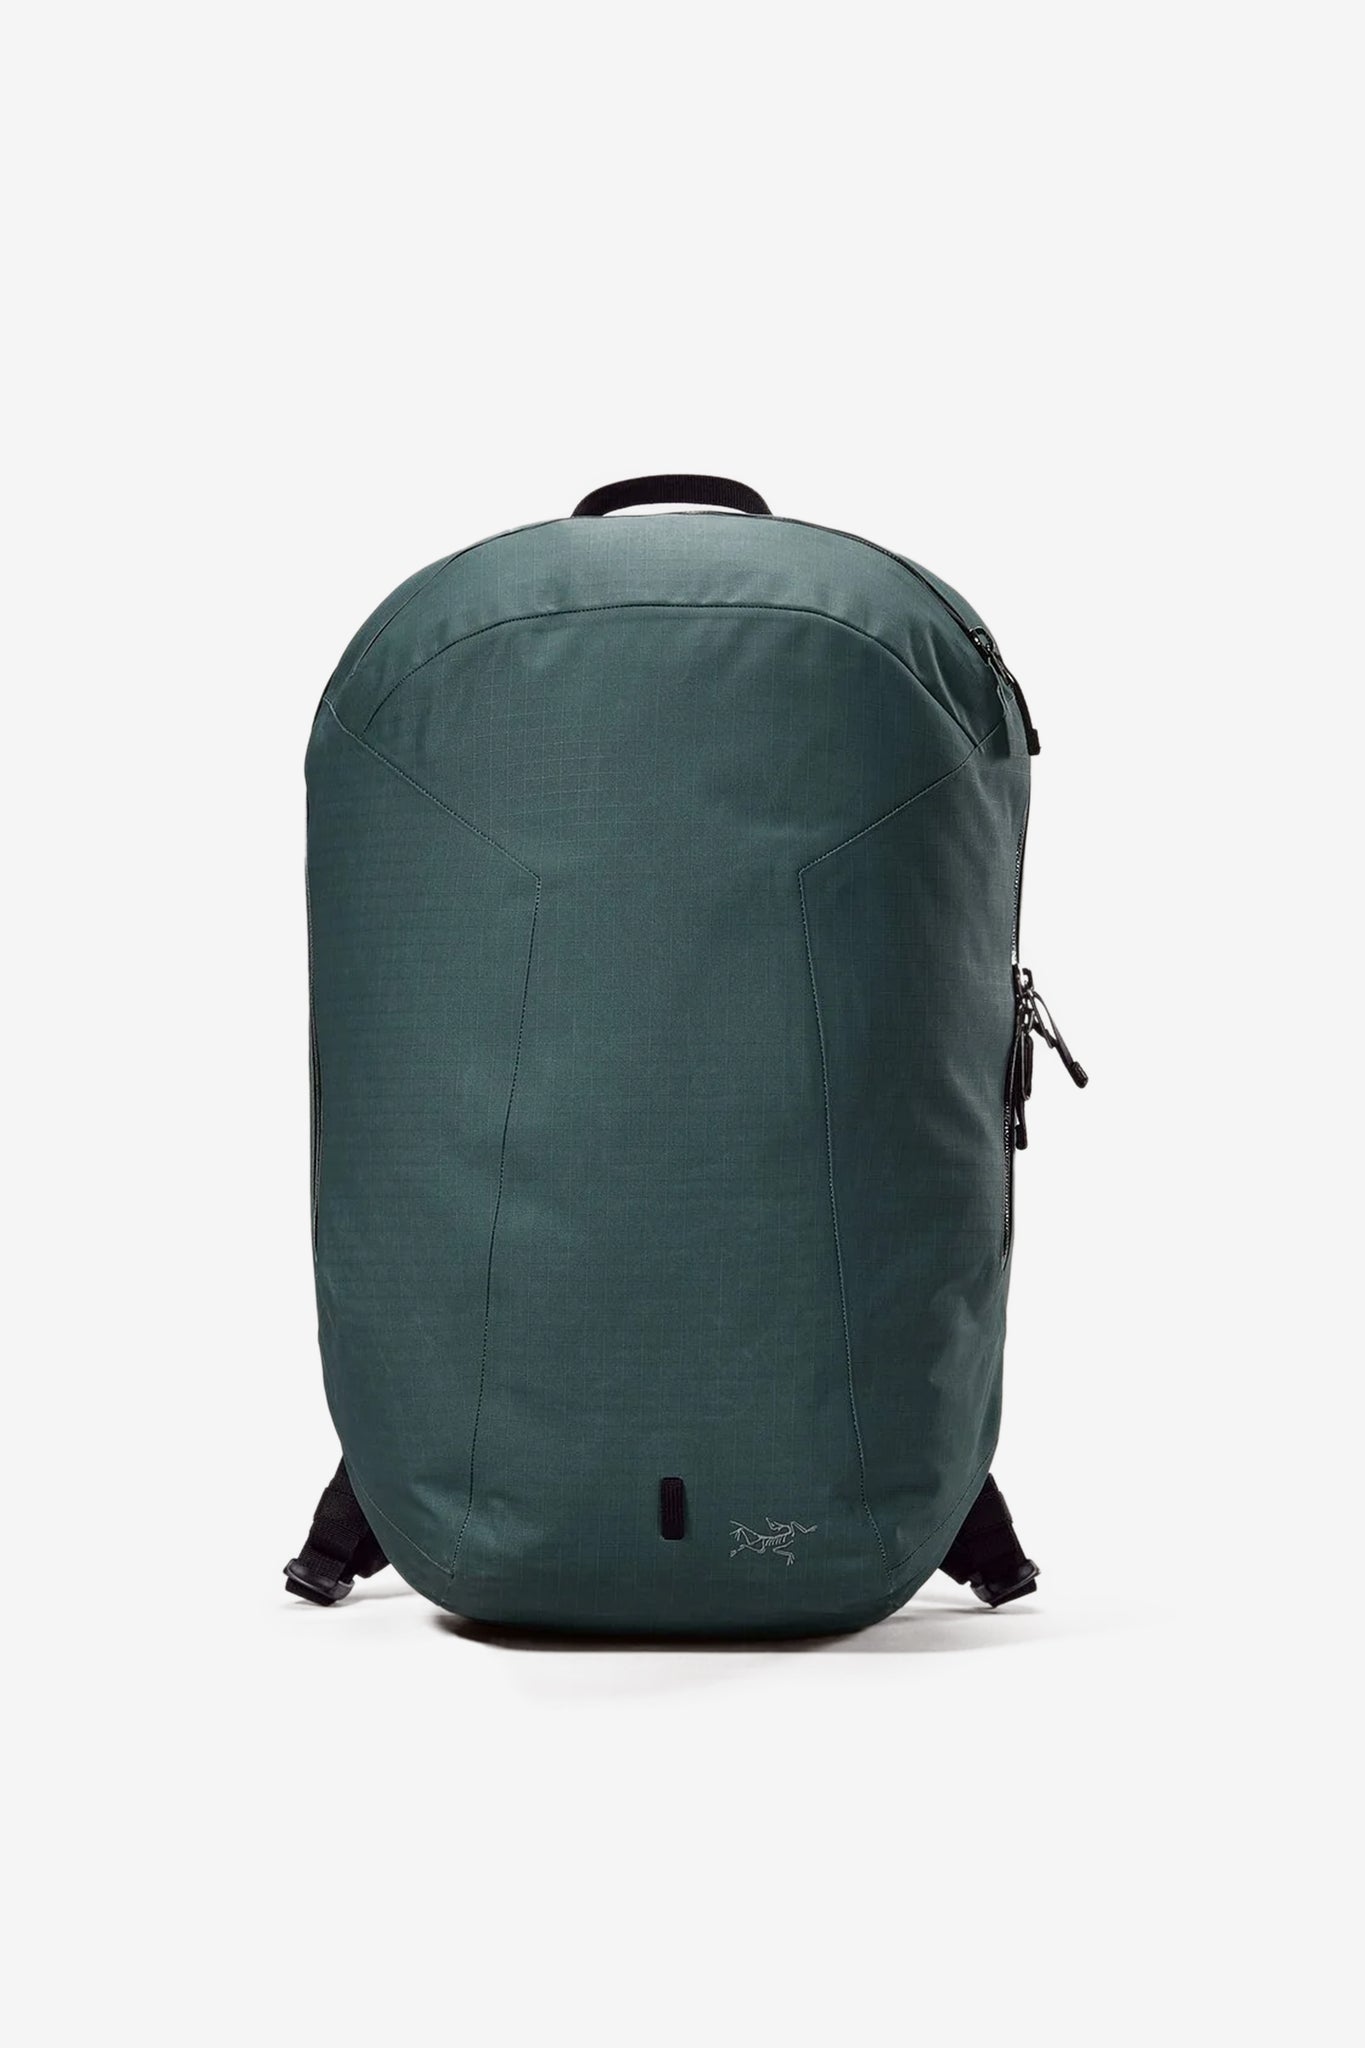 Arc'teryx Unisex Granville 16 Backpack in Boxcar